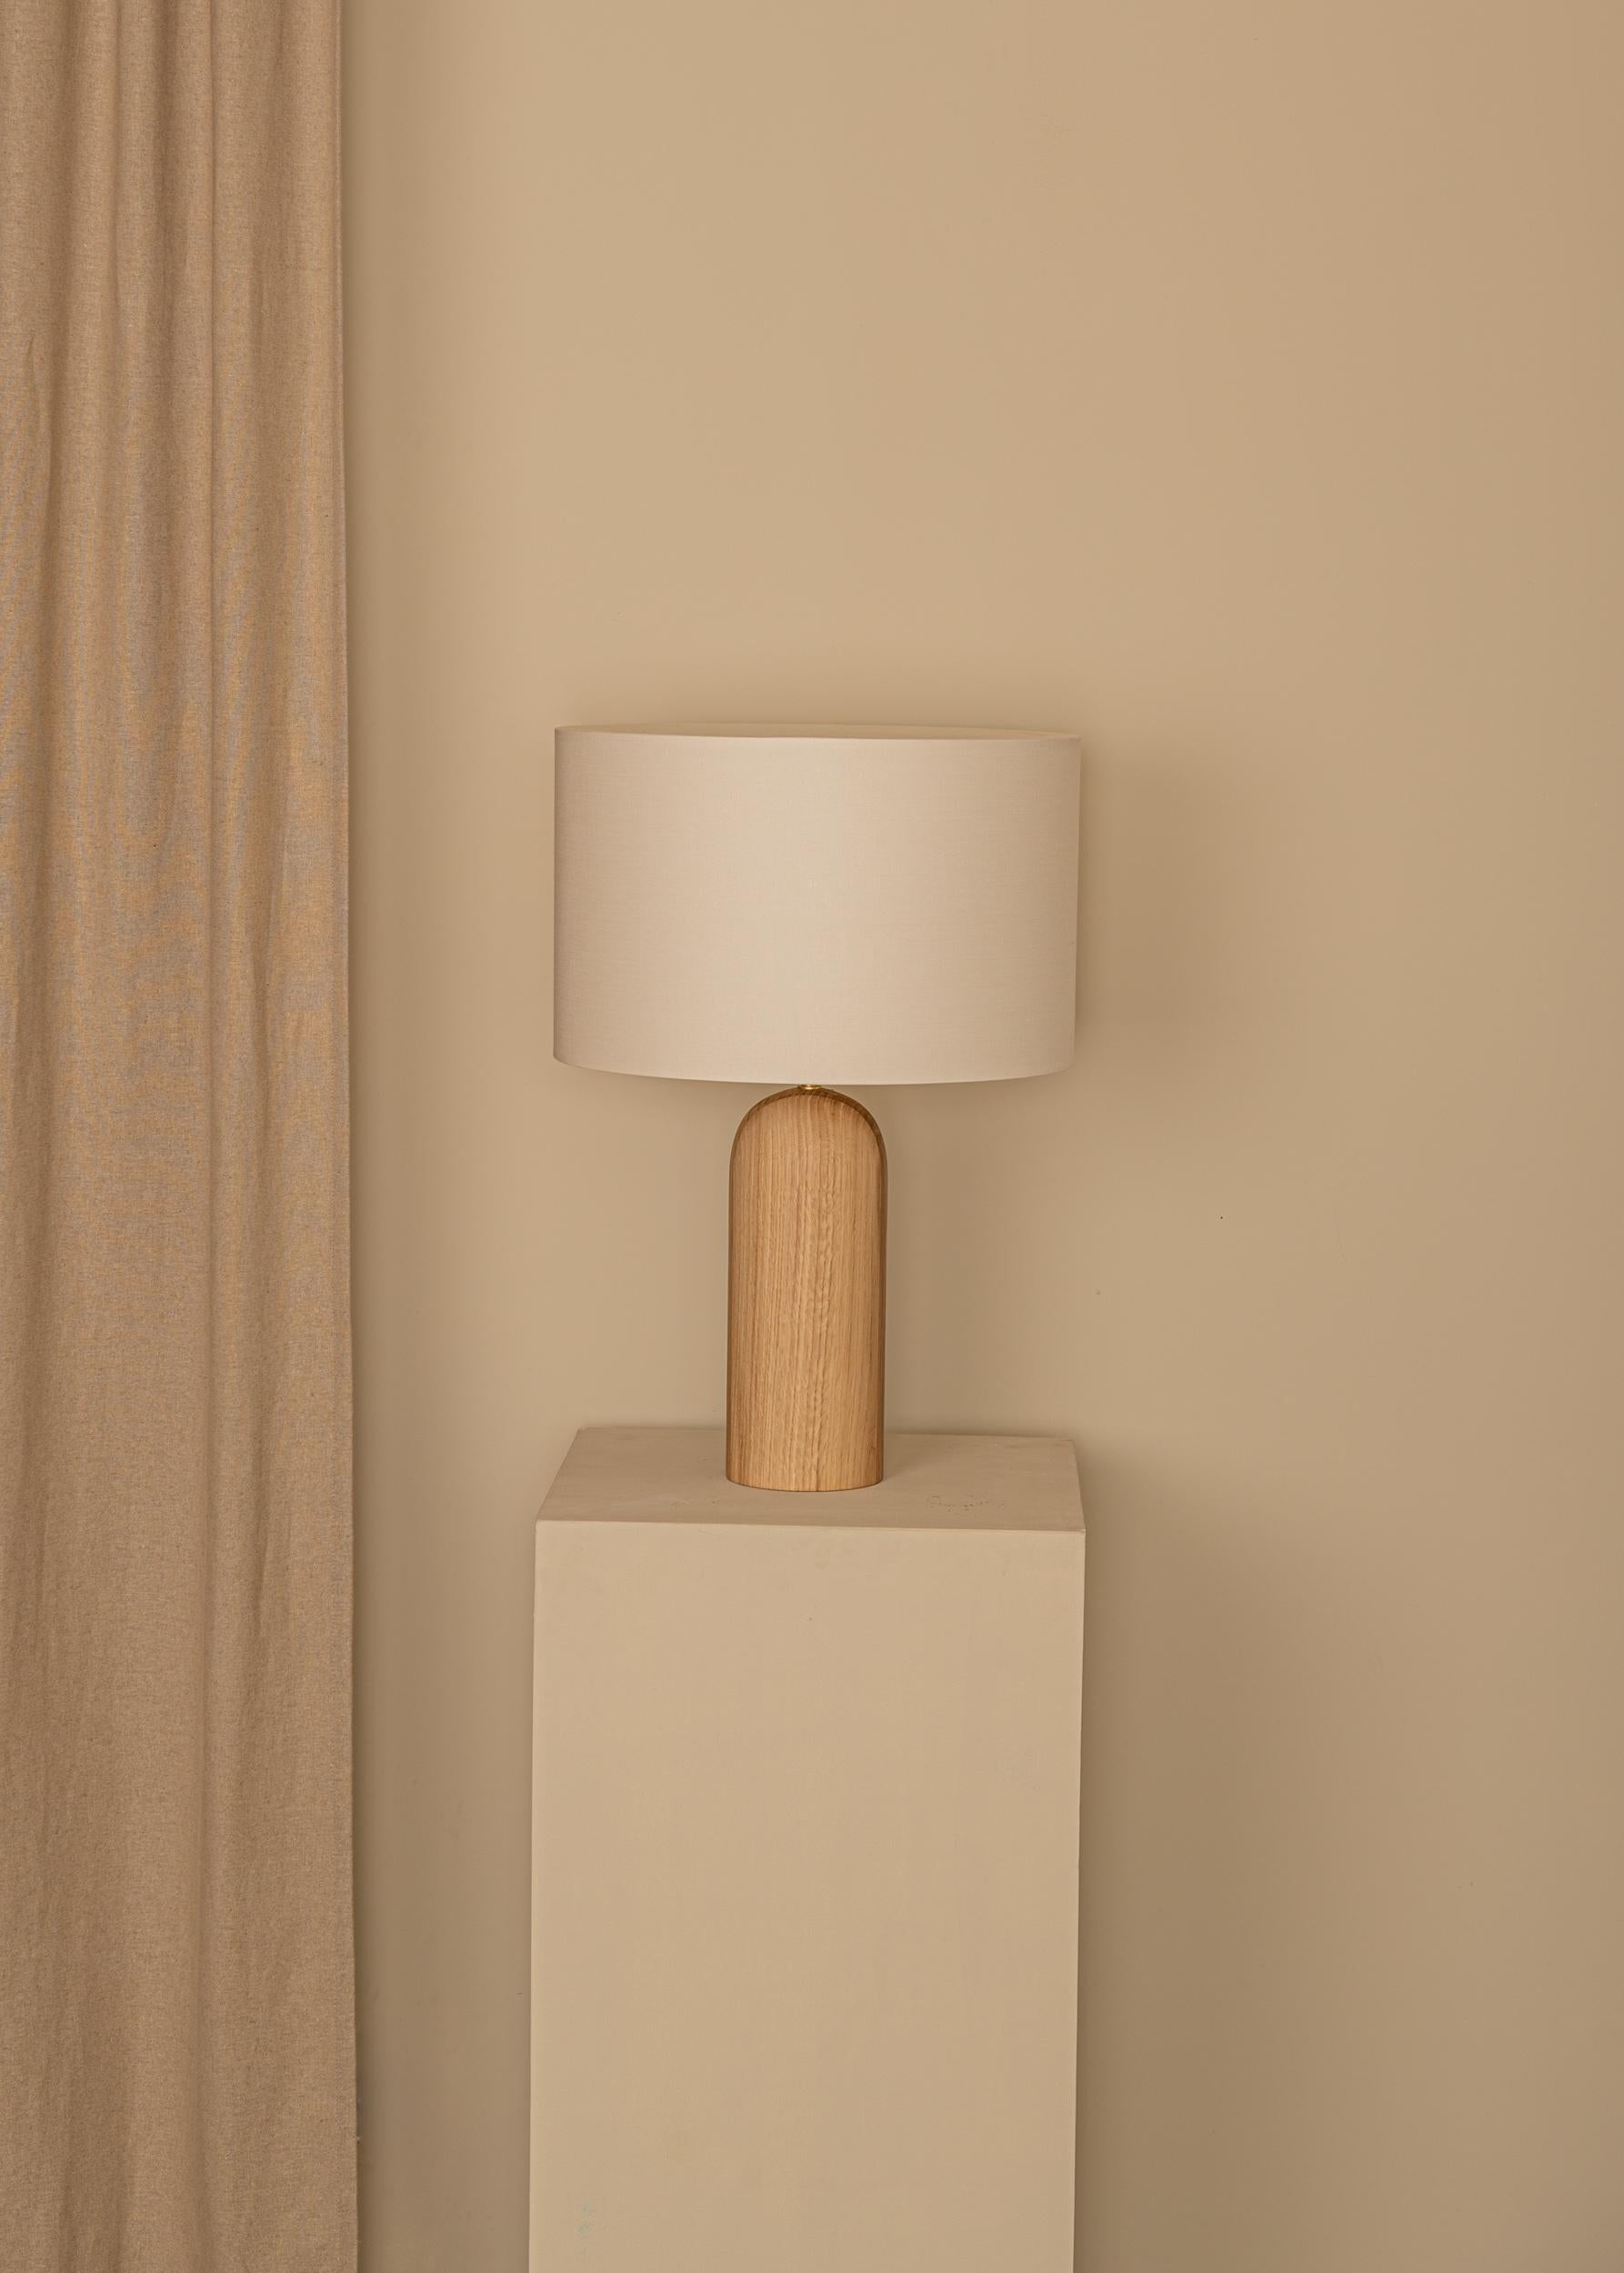 Oak Pura Table Lamp by Simone & Marcel
Dimensions: Ø 40 x H 58 cm.
Materials: Brass, cotton and oak.

Also available in different marble, wood and alabaster options and finishes. Custom options available on request. Please contact us. 

All our